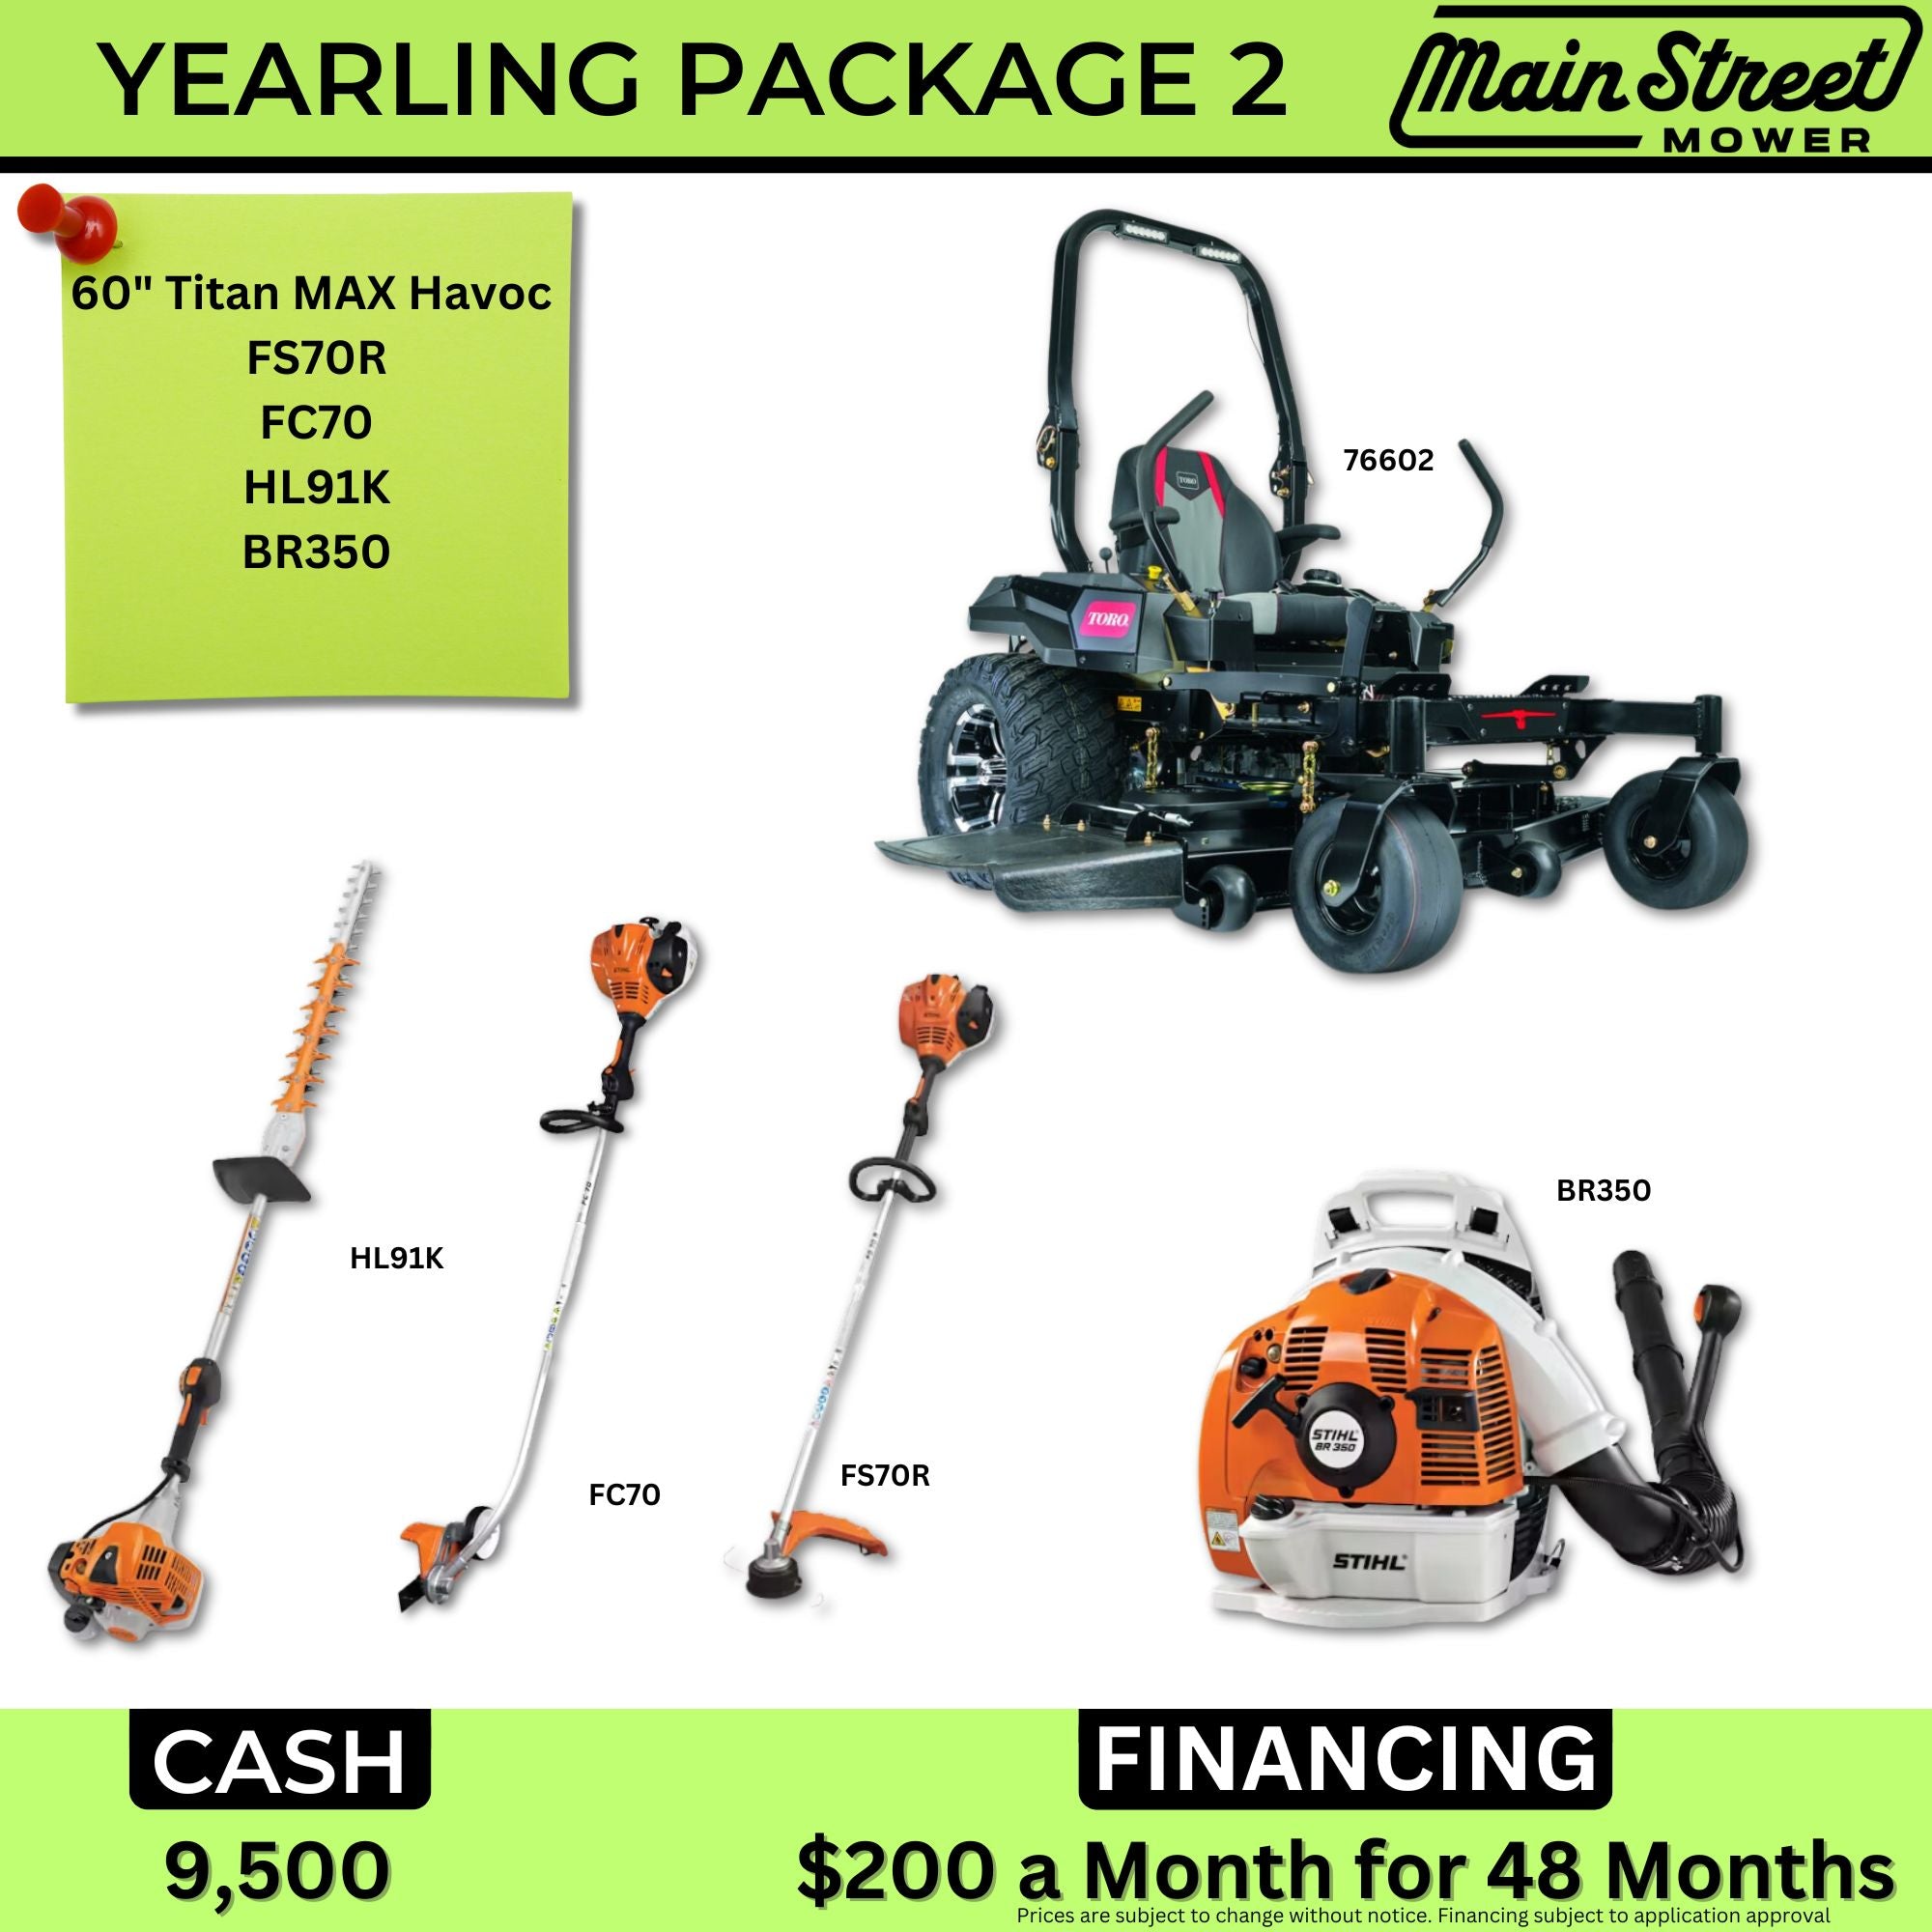 Yearling Package 2 |Mower|Trimmer|Edger|Hedge Trimmer|Blower